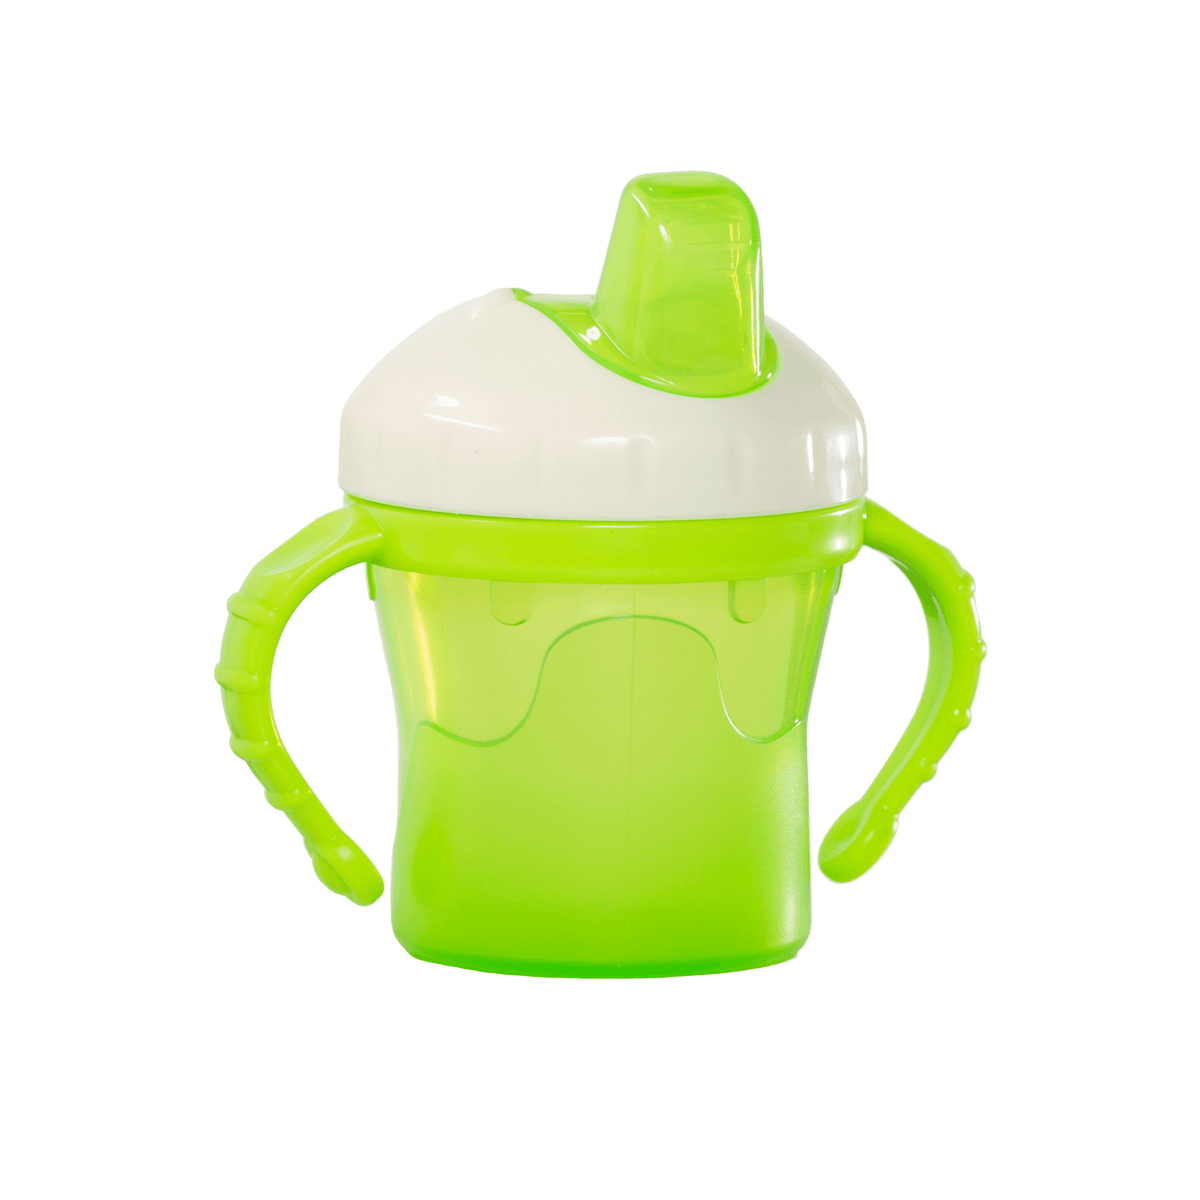 The One Cup with spout cover and handles. Green.